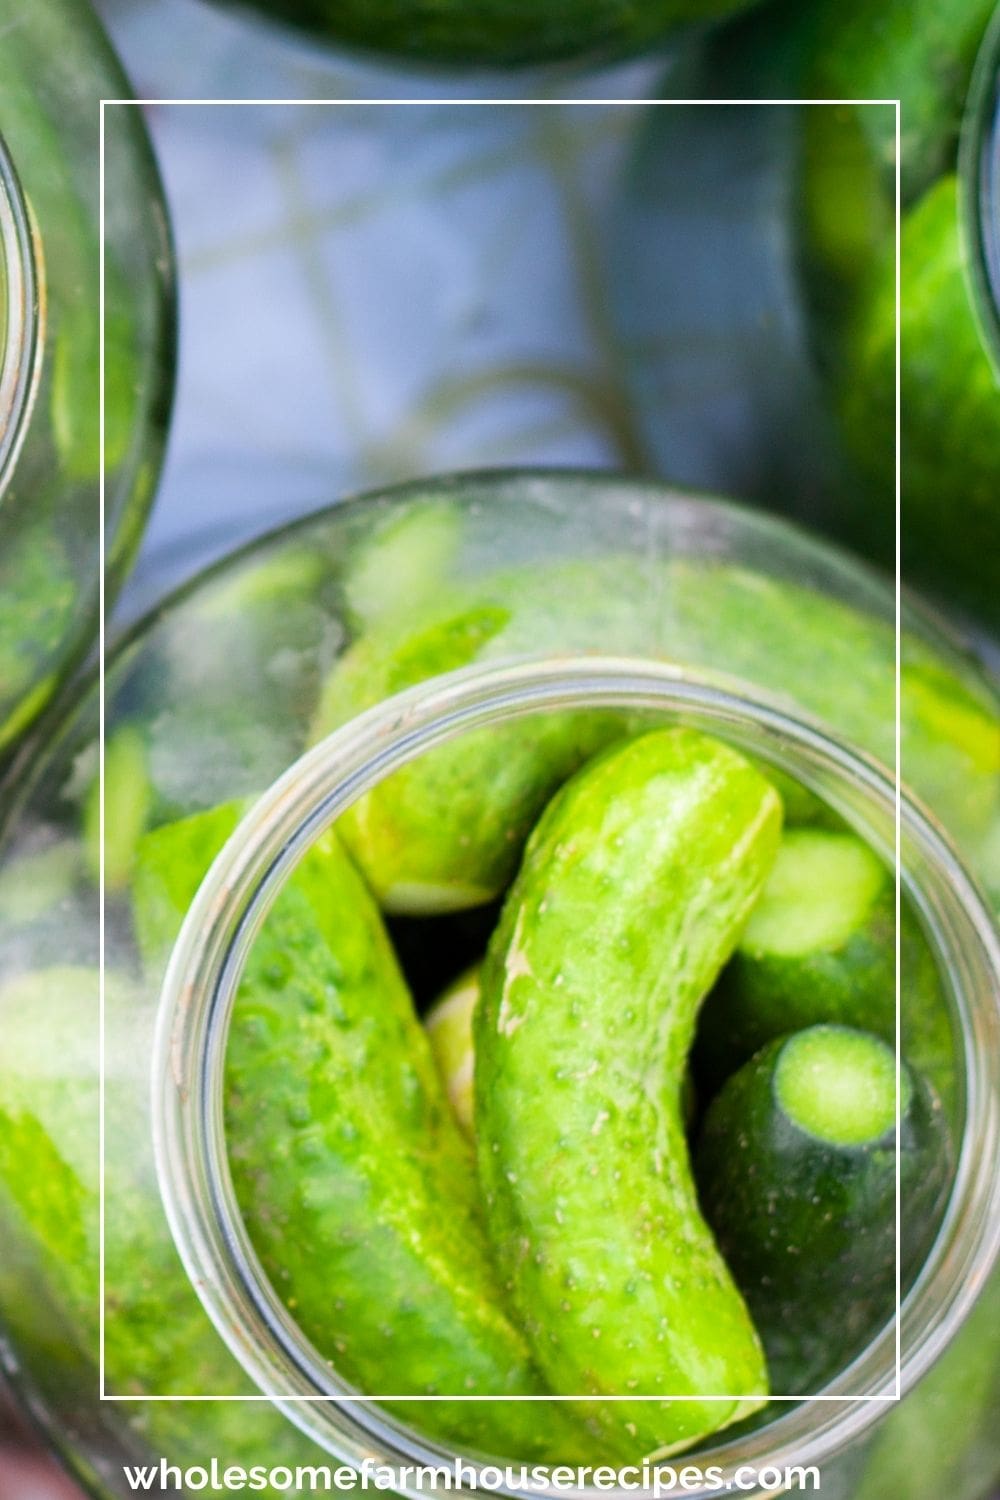 Packing Cucumbers into jars